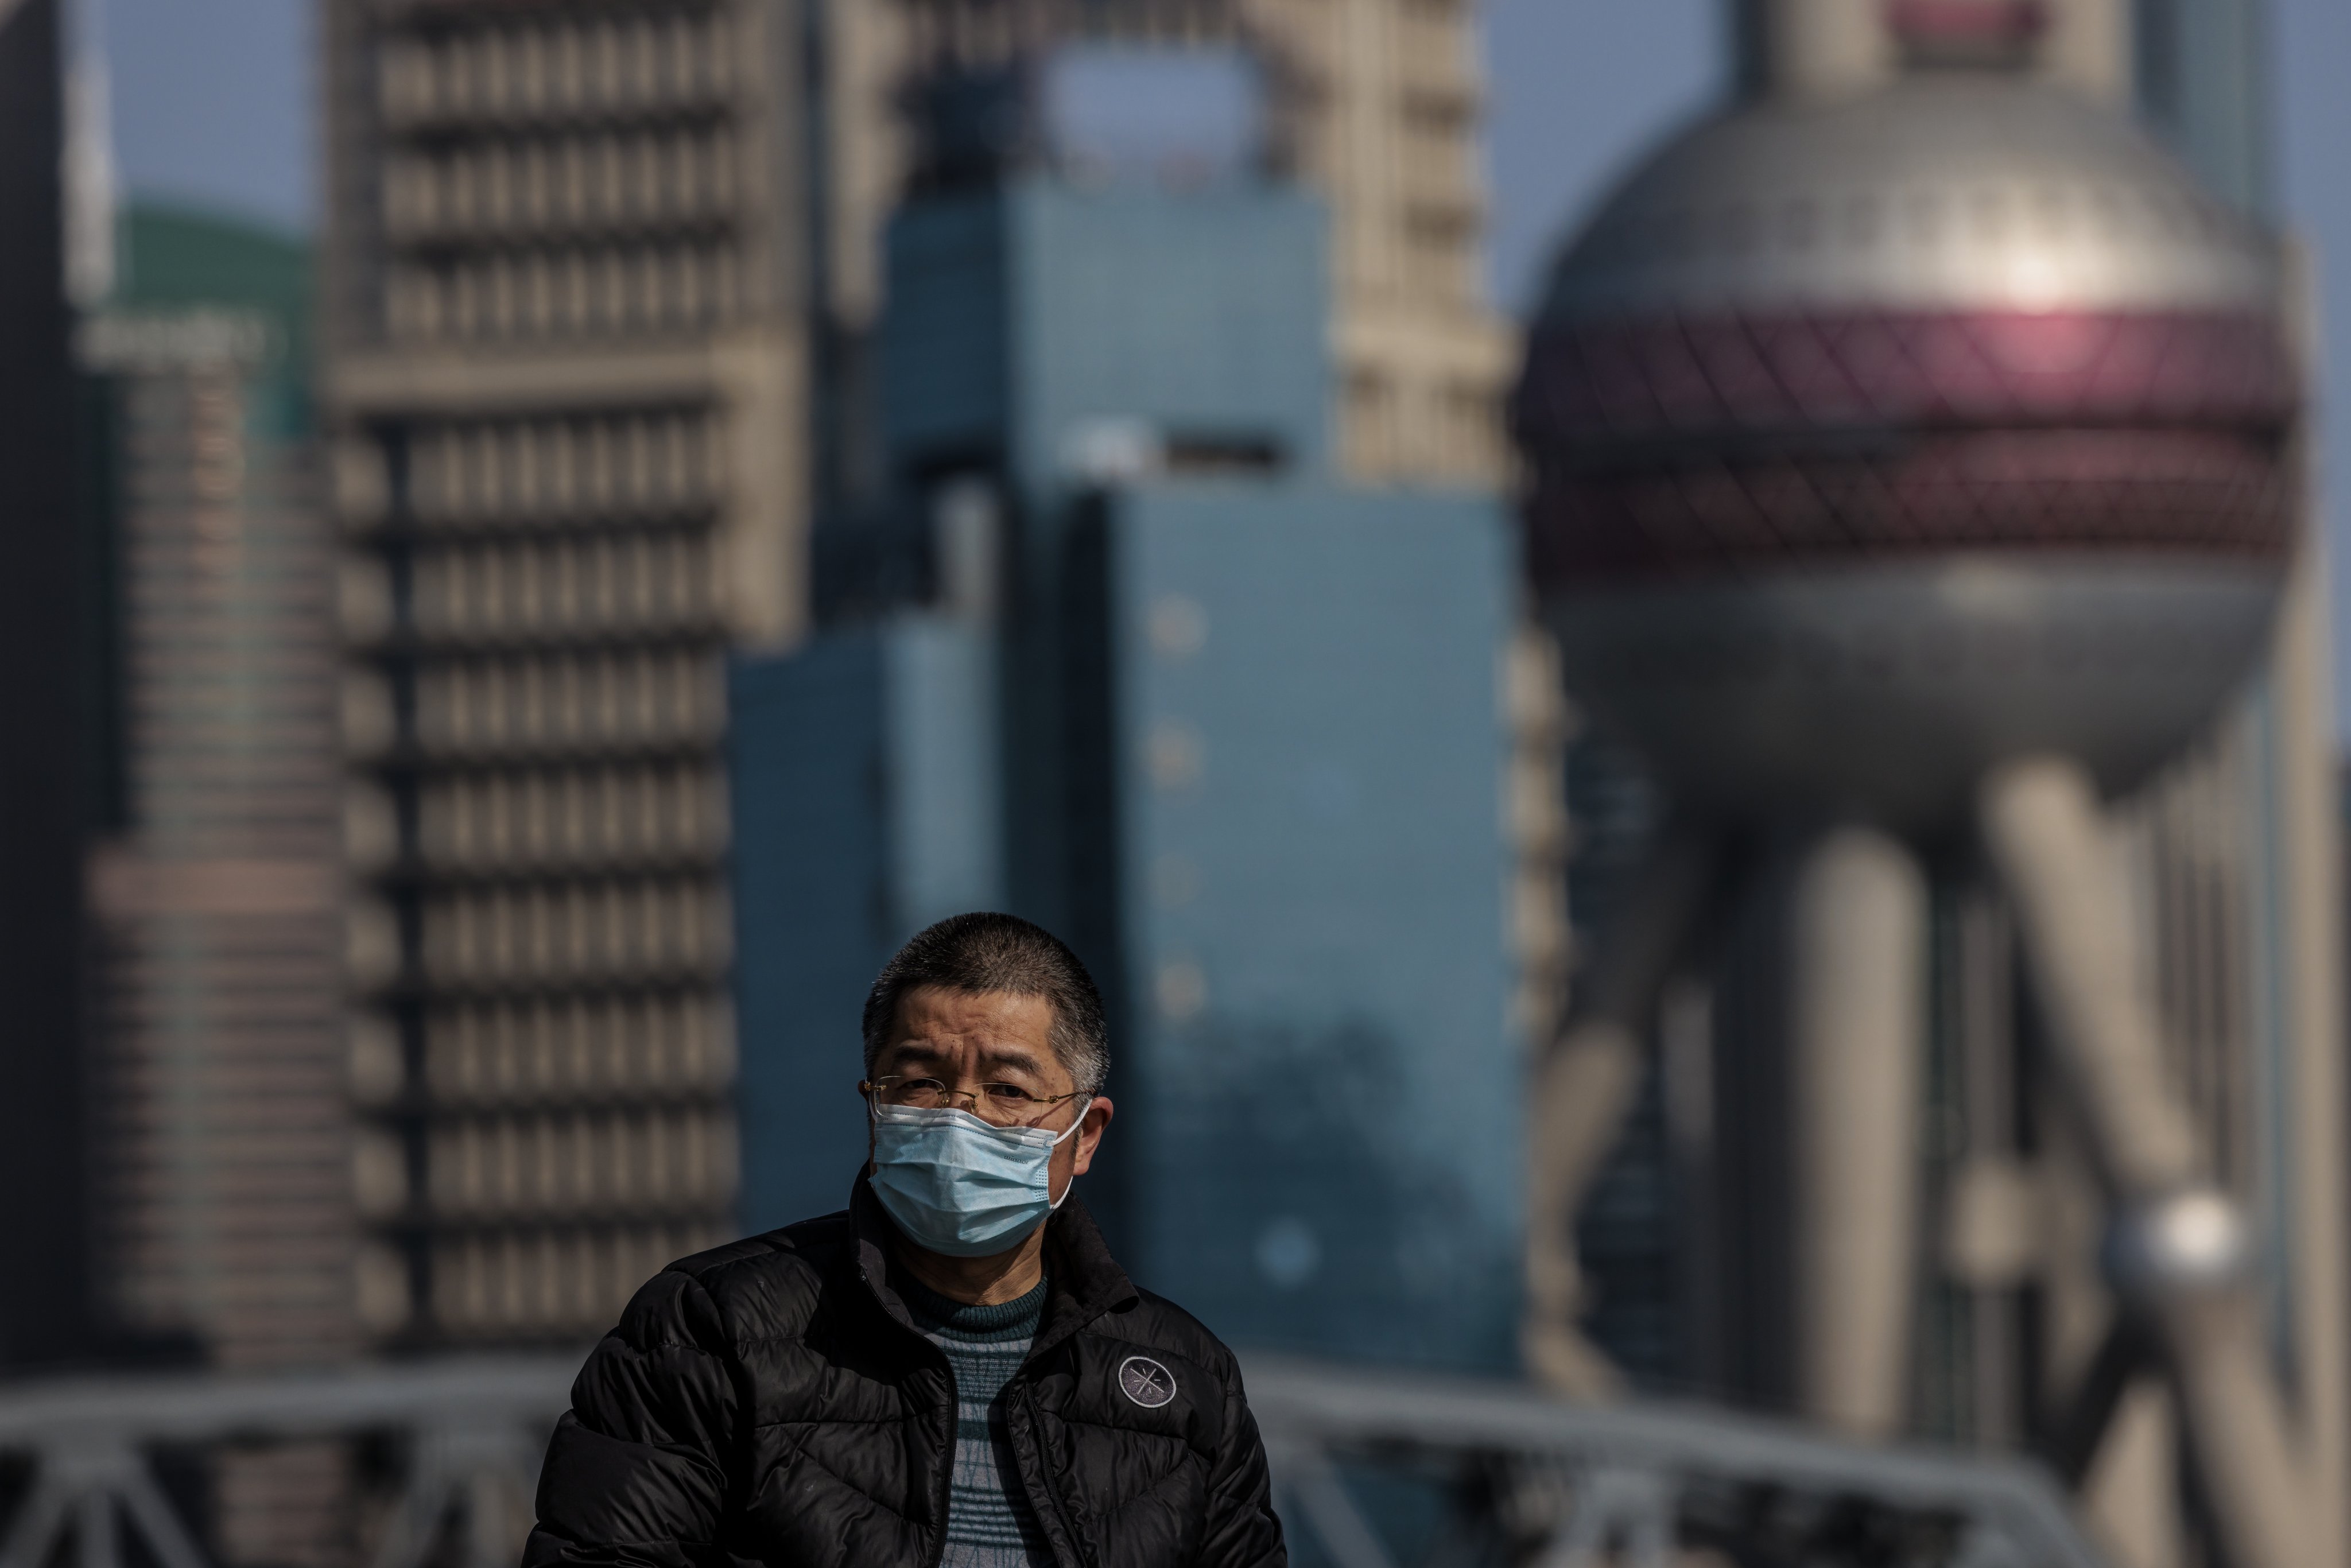 A man is seen with the Shanghai tower in the background, on March 29. The city hopes to see lockdowns end soon. Photo: EPA-EFE/